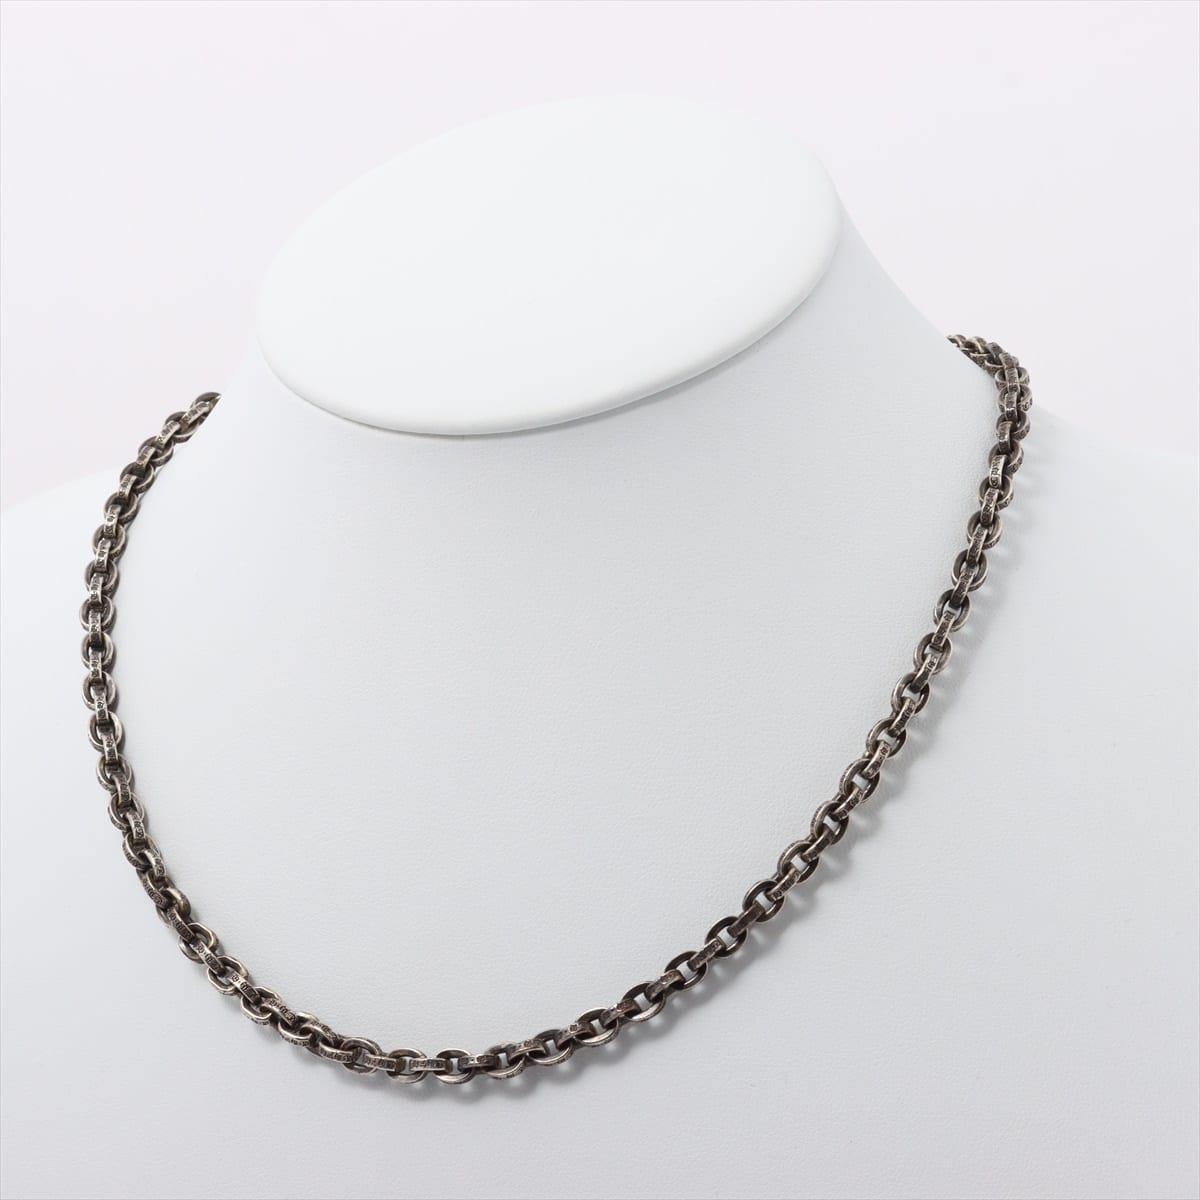 Chrome Hearts Paper Chain 18 inches Necklace 925×14K 34.7g Silver